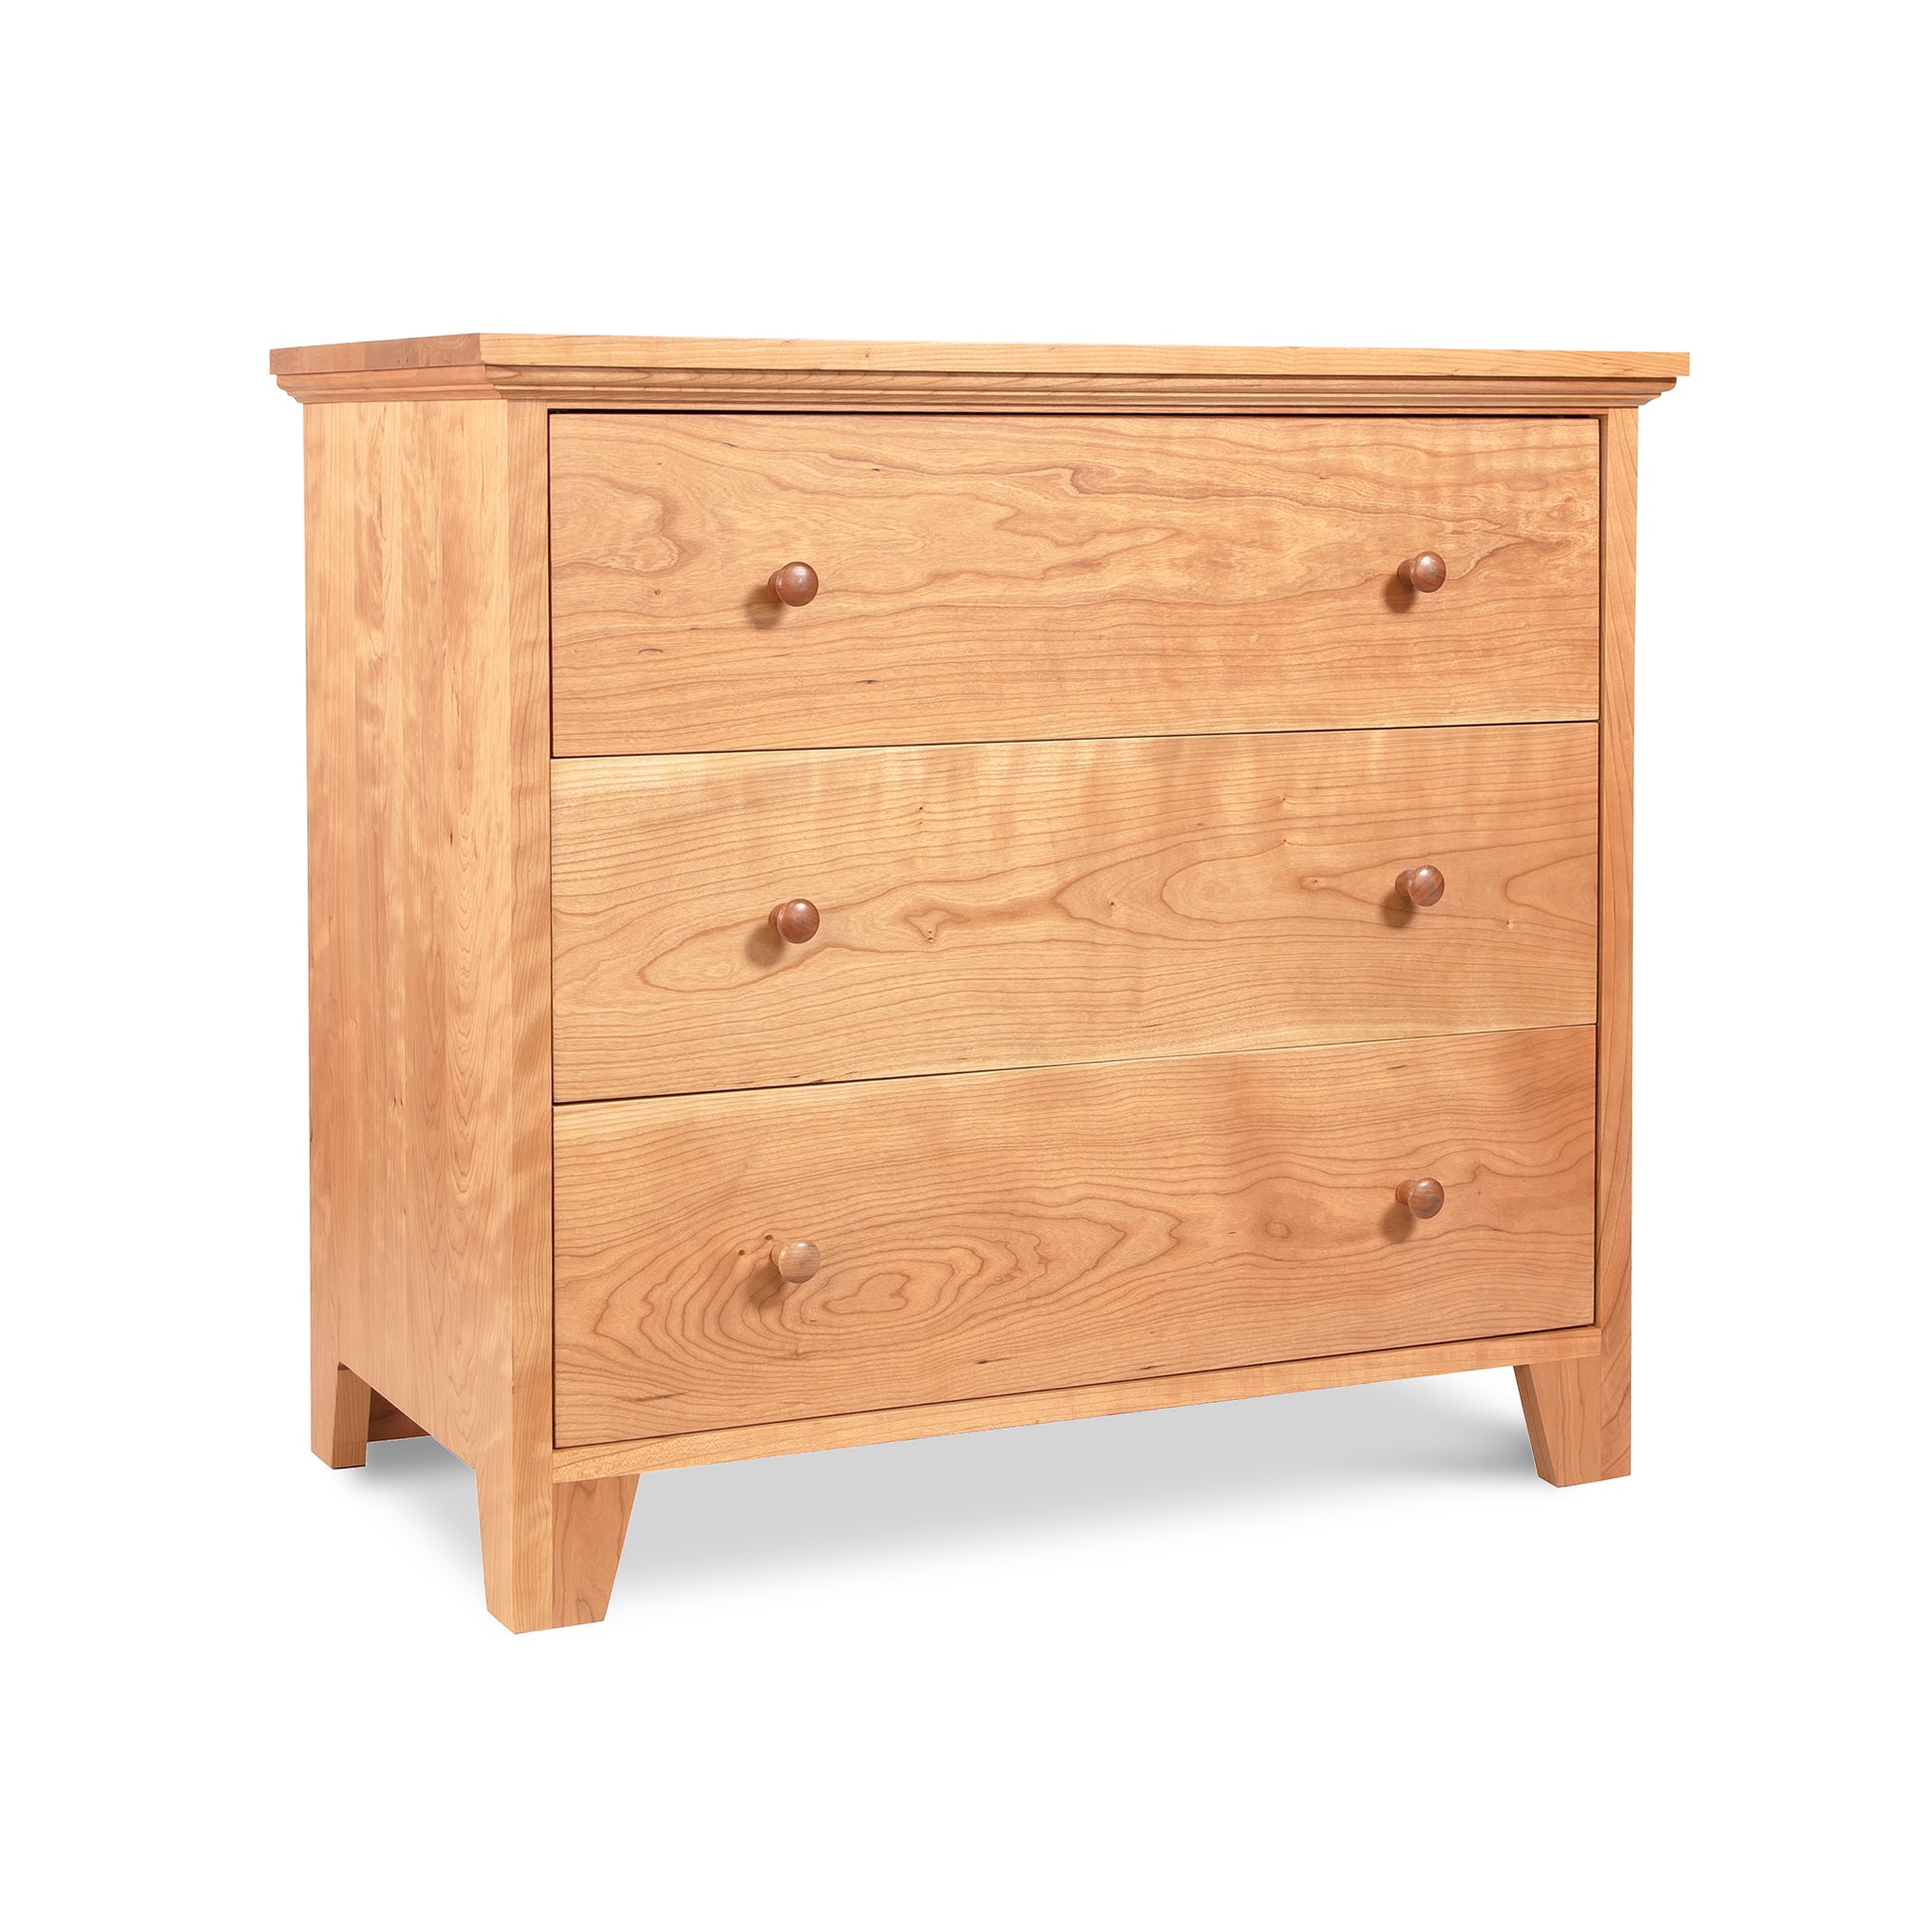 A wooden American Country 3-Drawer Chest handmade by Lyndon Furniture in Vermont with a natural cherry finish, displayed on a white background.